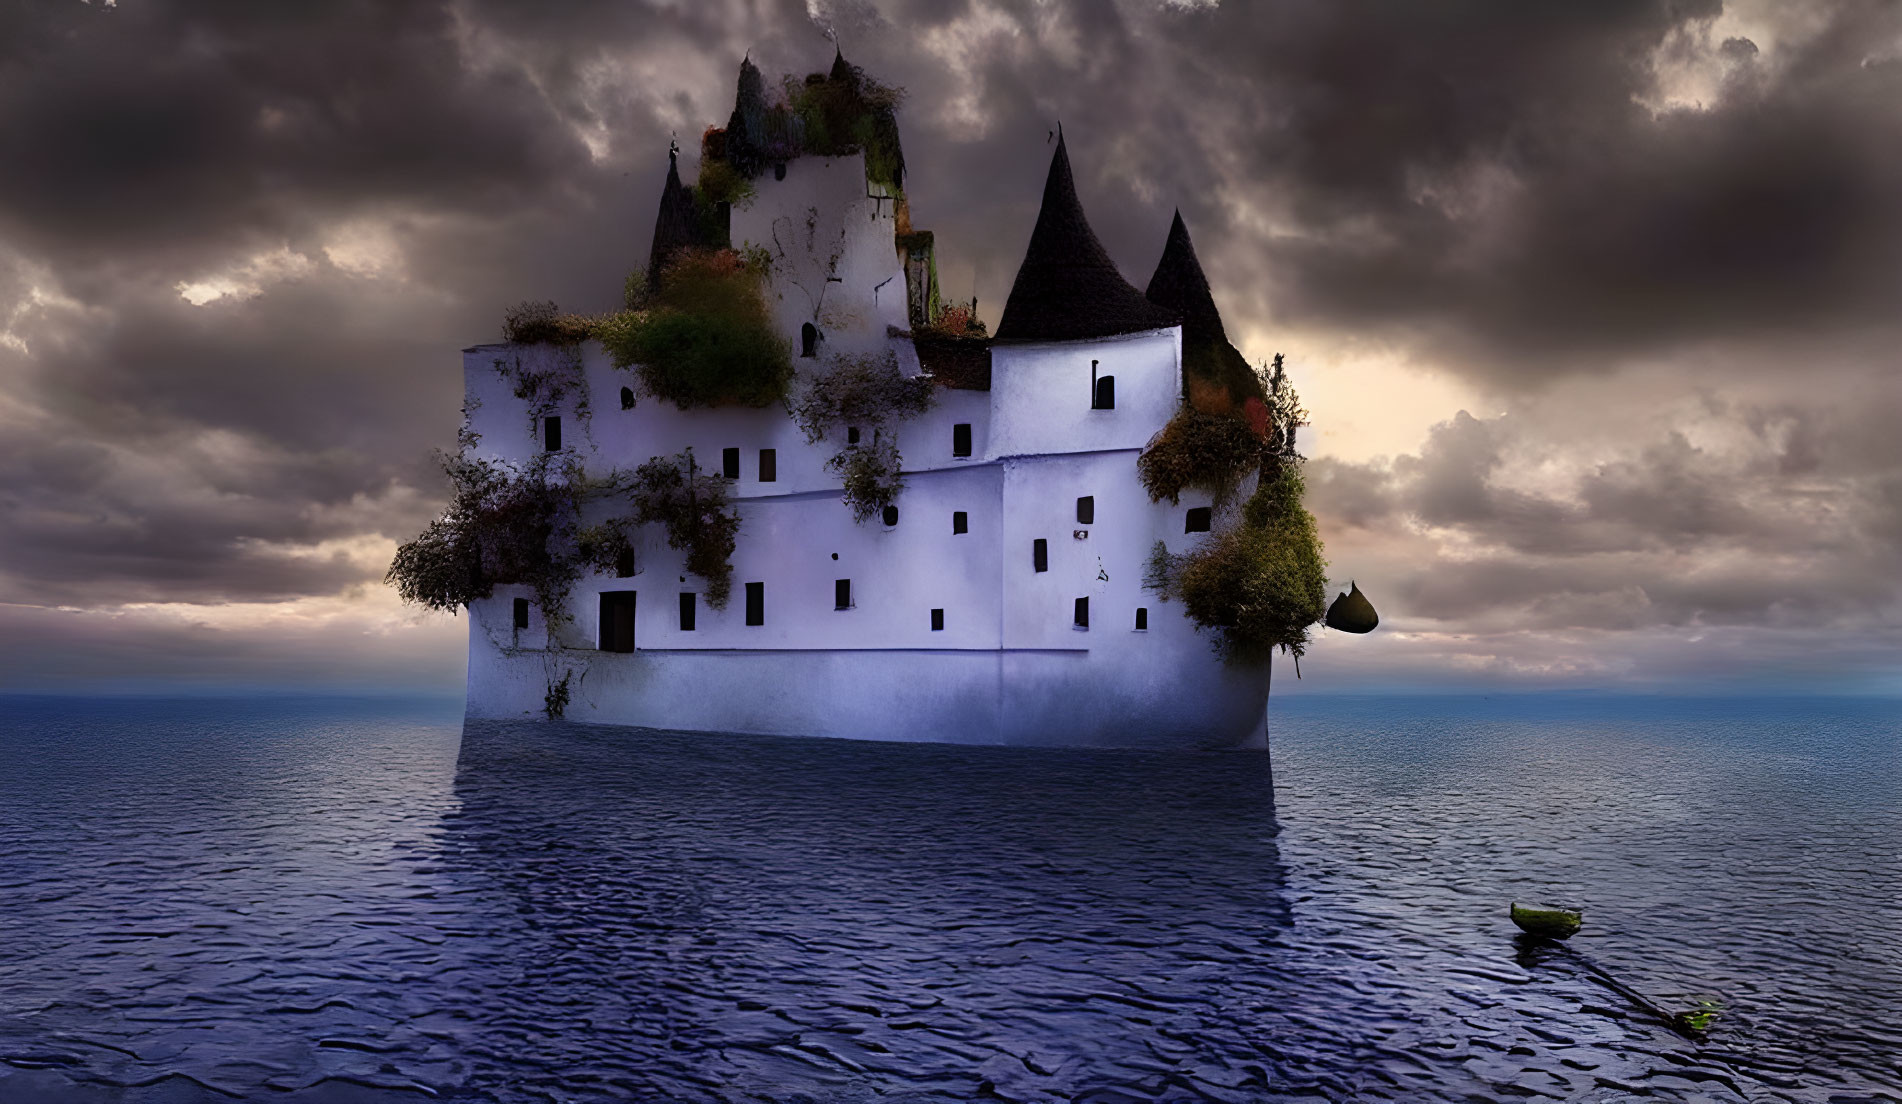 White Castle with Black Roofs Floating on Water in Surreal Dusk Scene